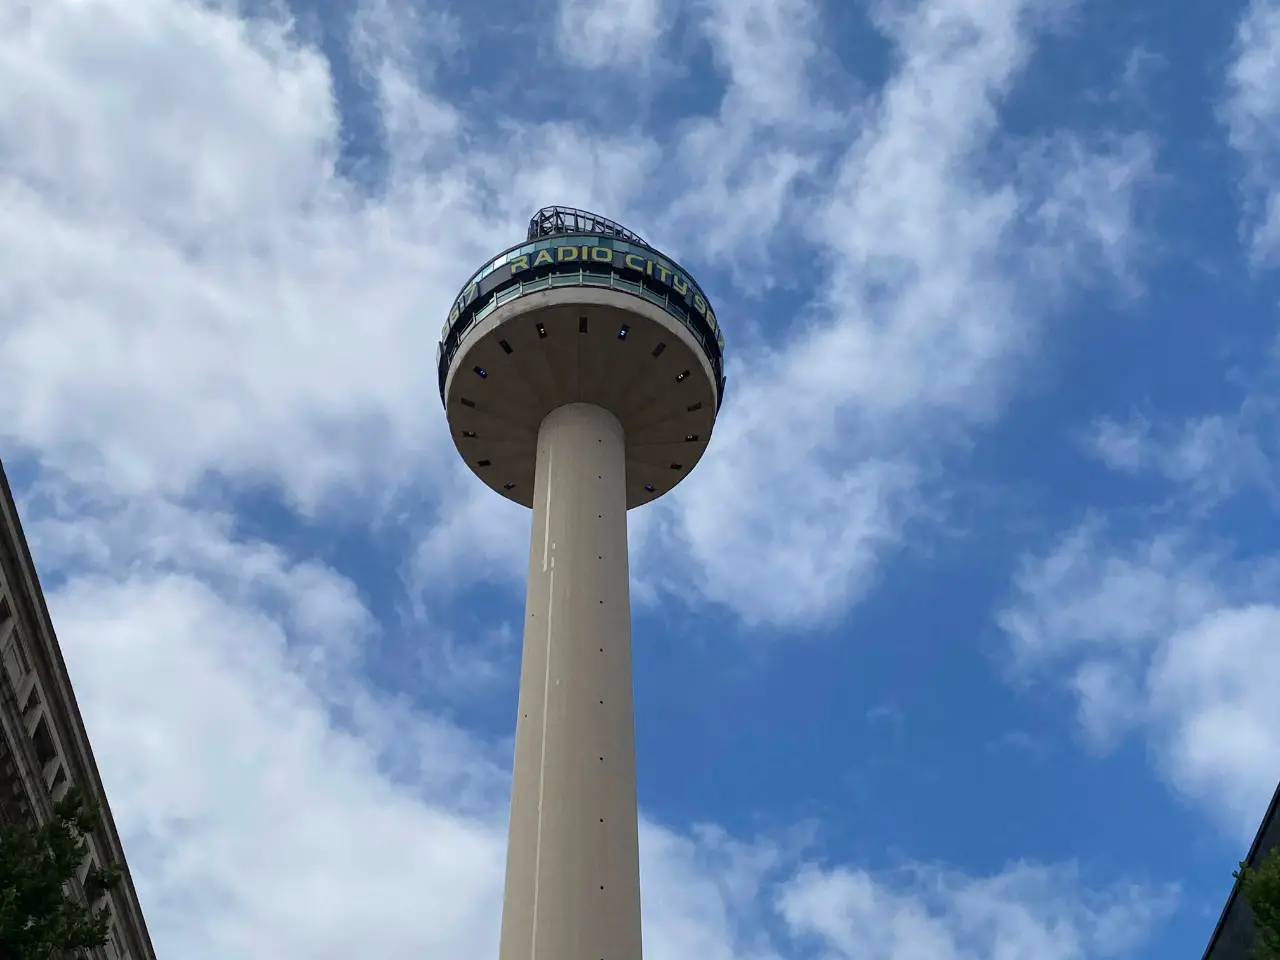 St Johns Beacon, also called the Radio City Tower, Liverpool